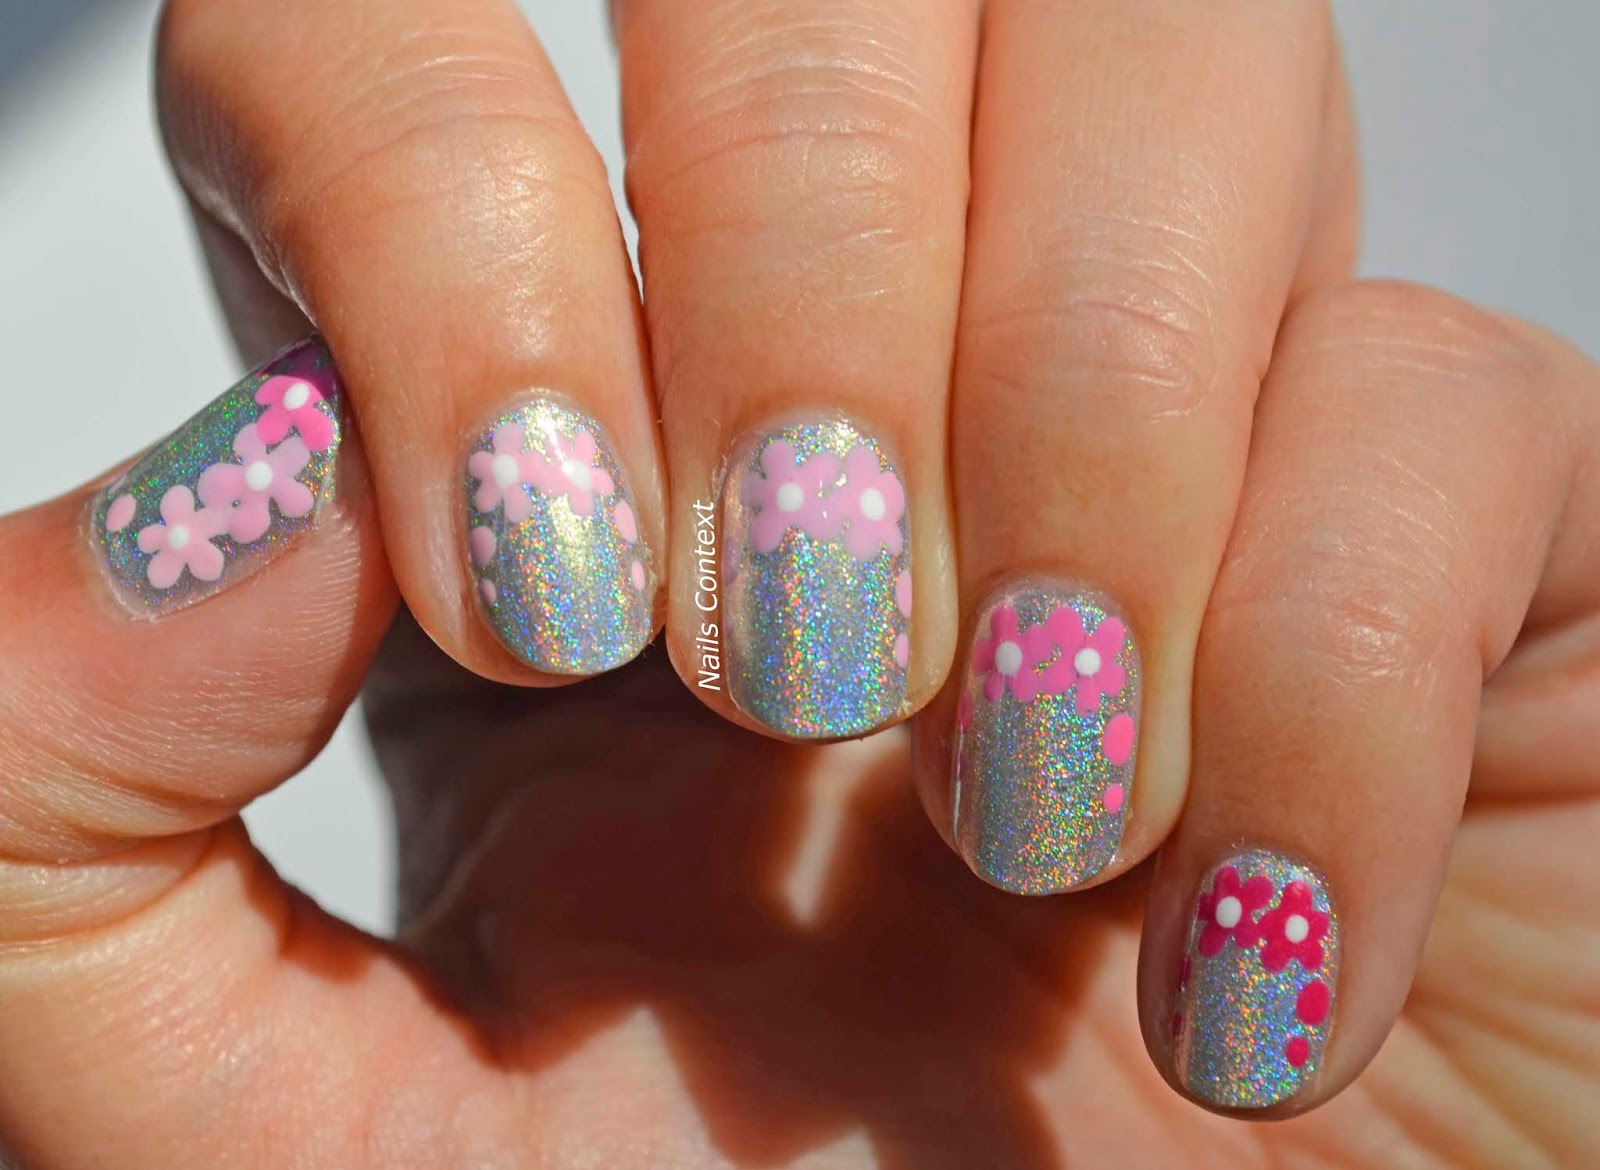 2. Holographic Pink Nail Art - wide 3